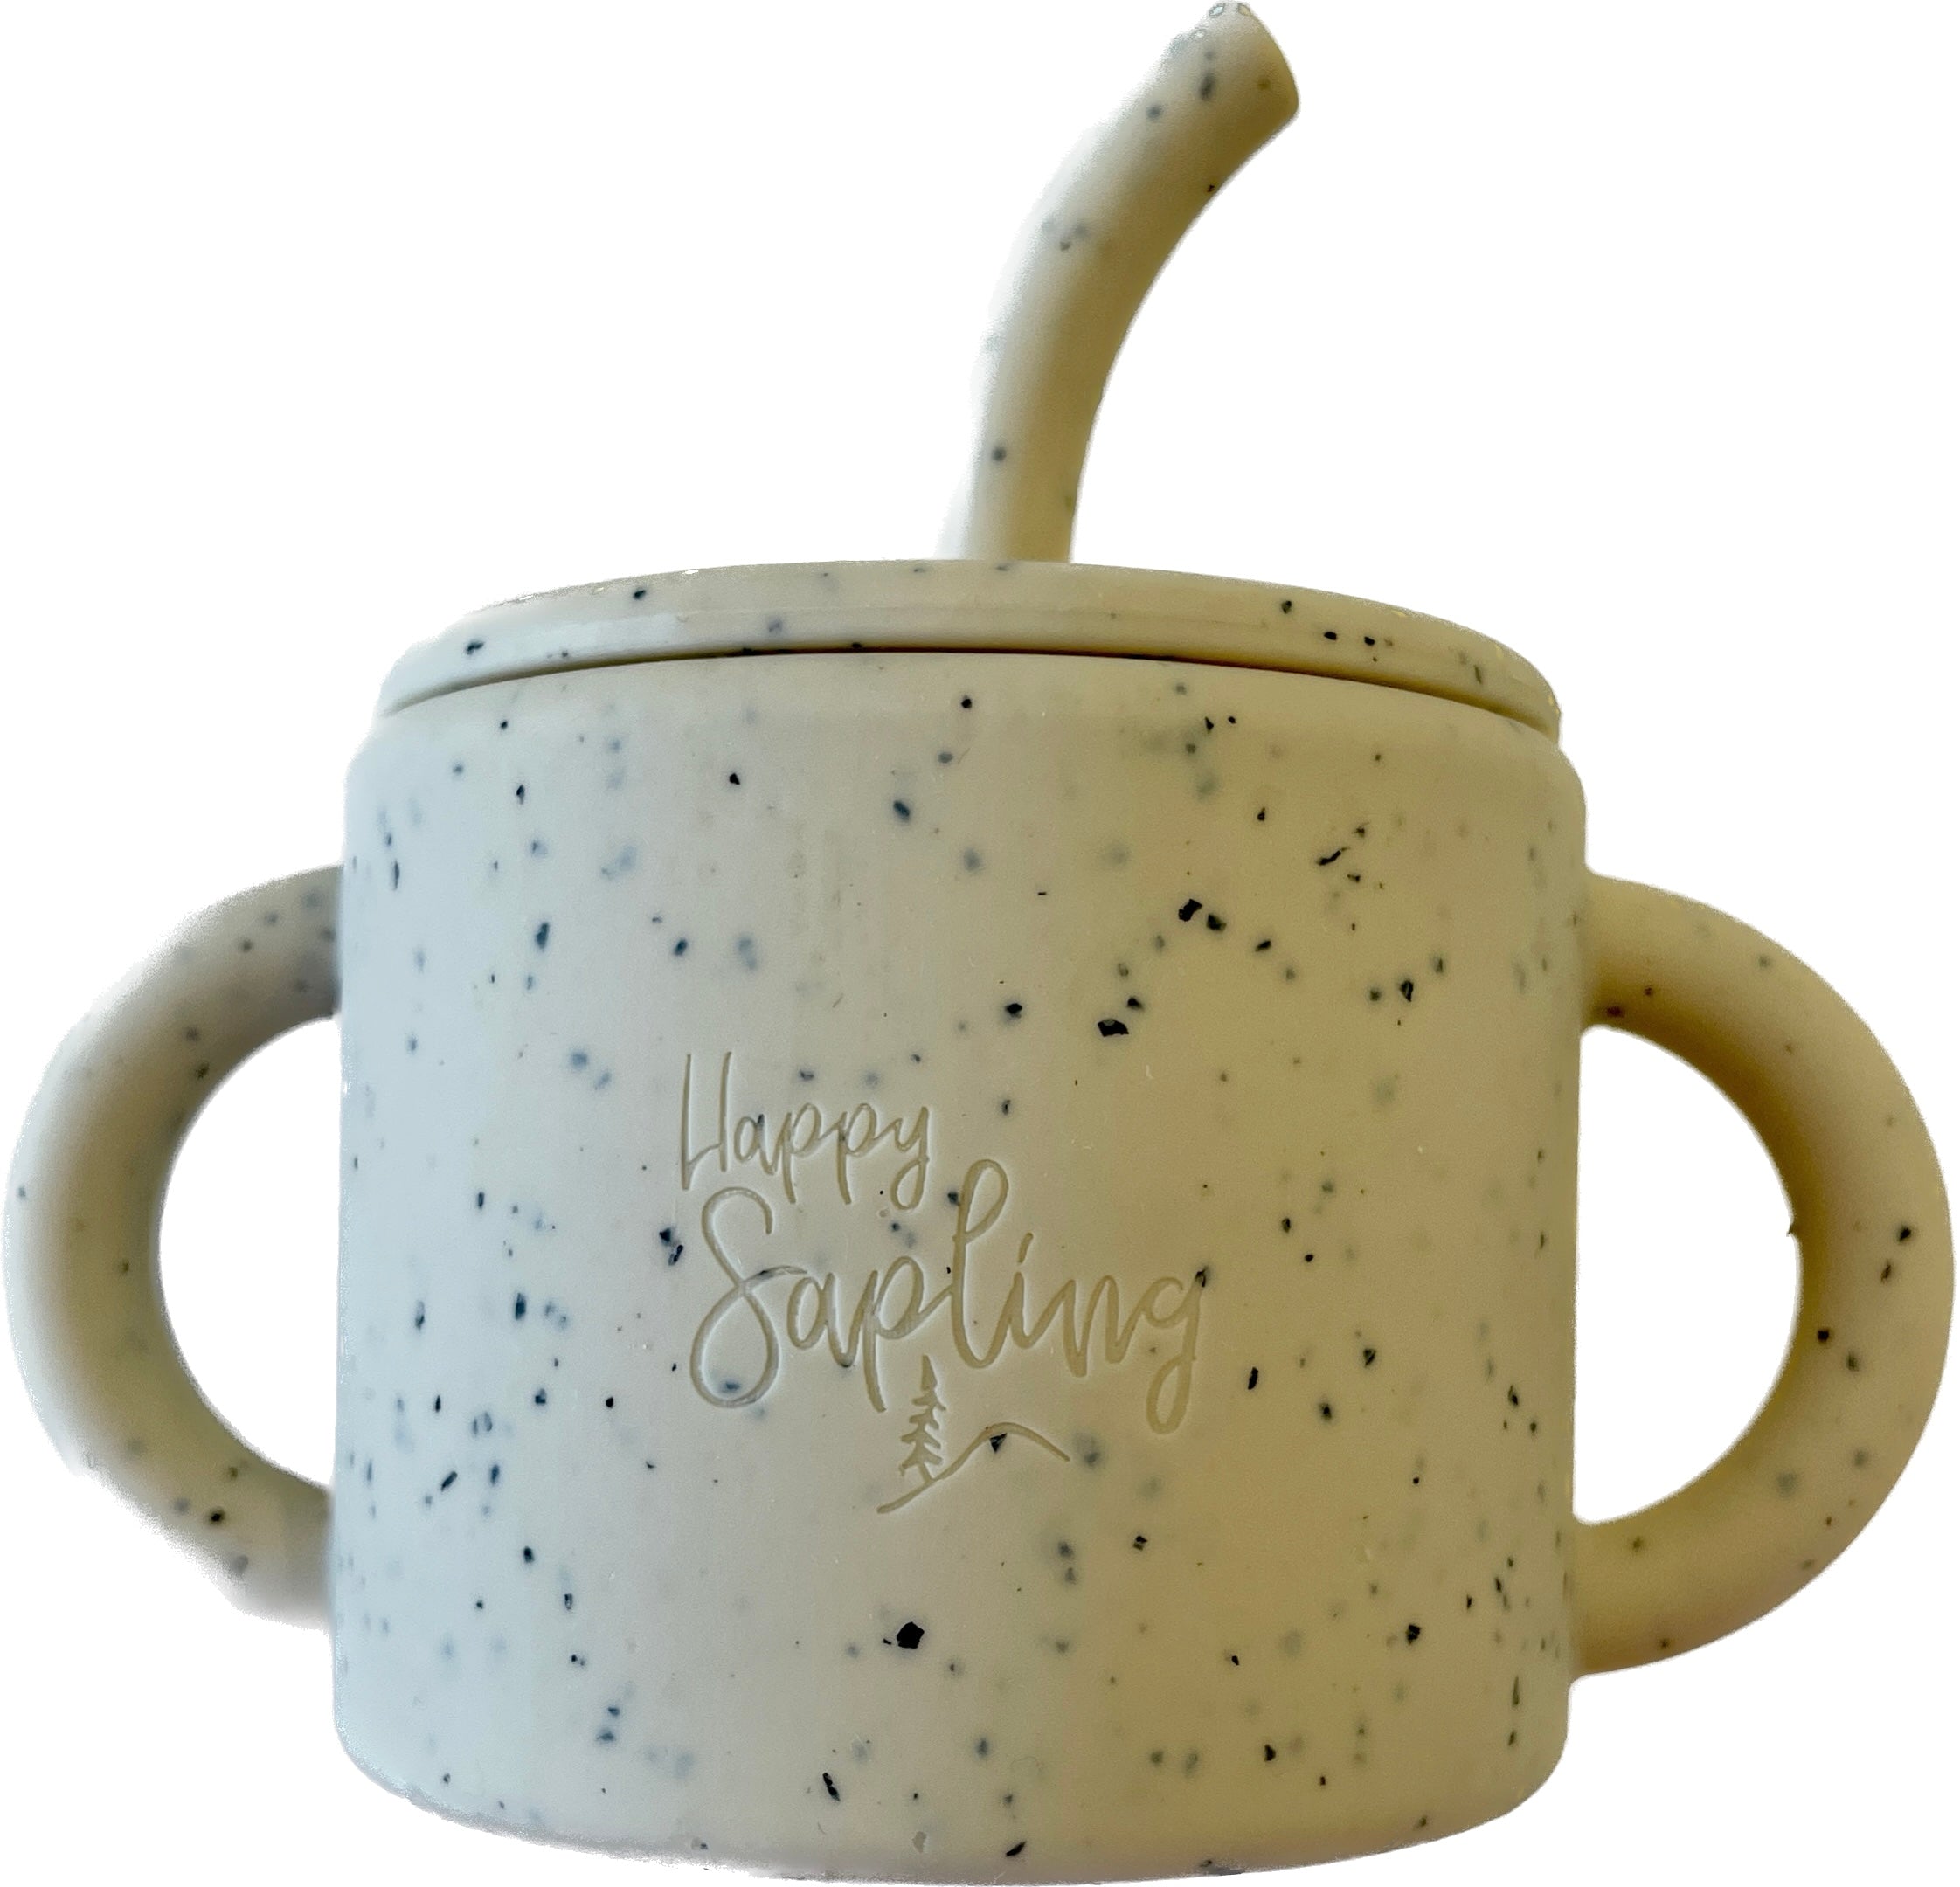 Speckled Drinking Cup